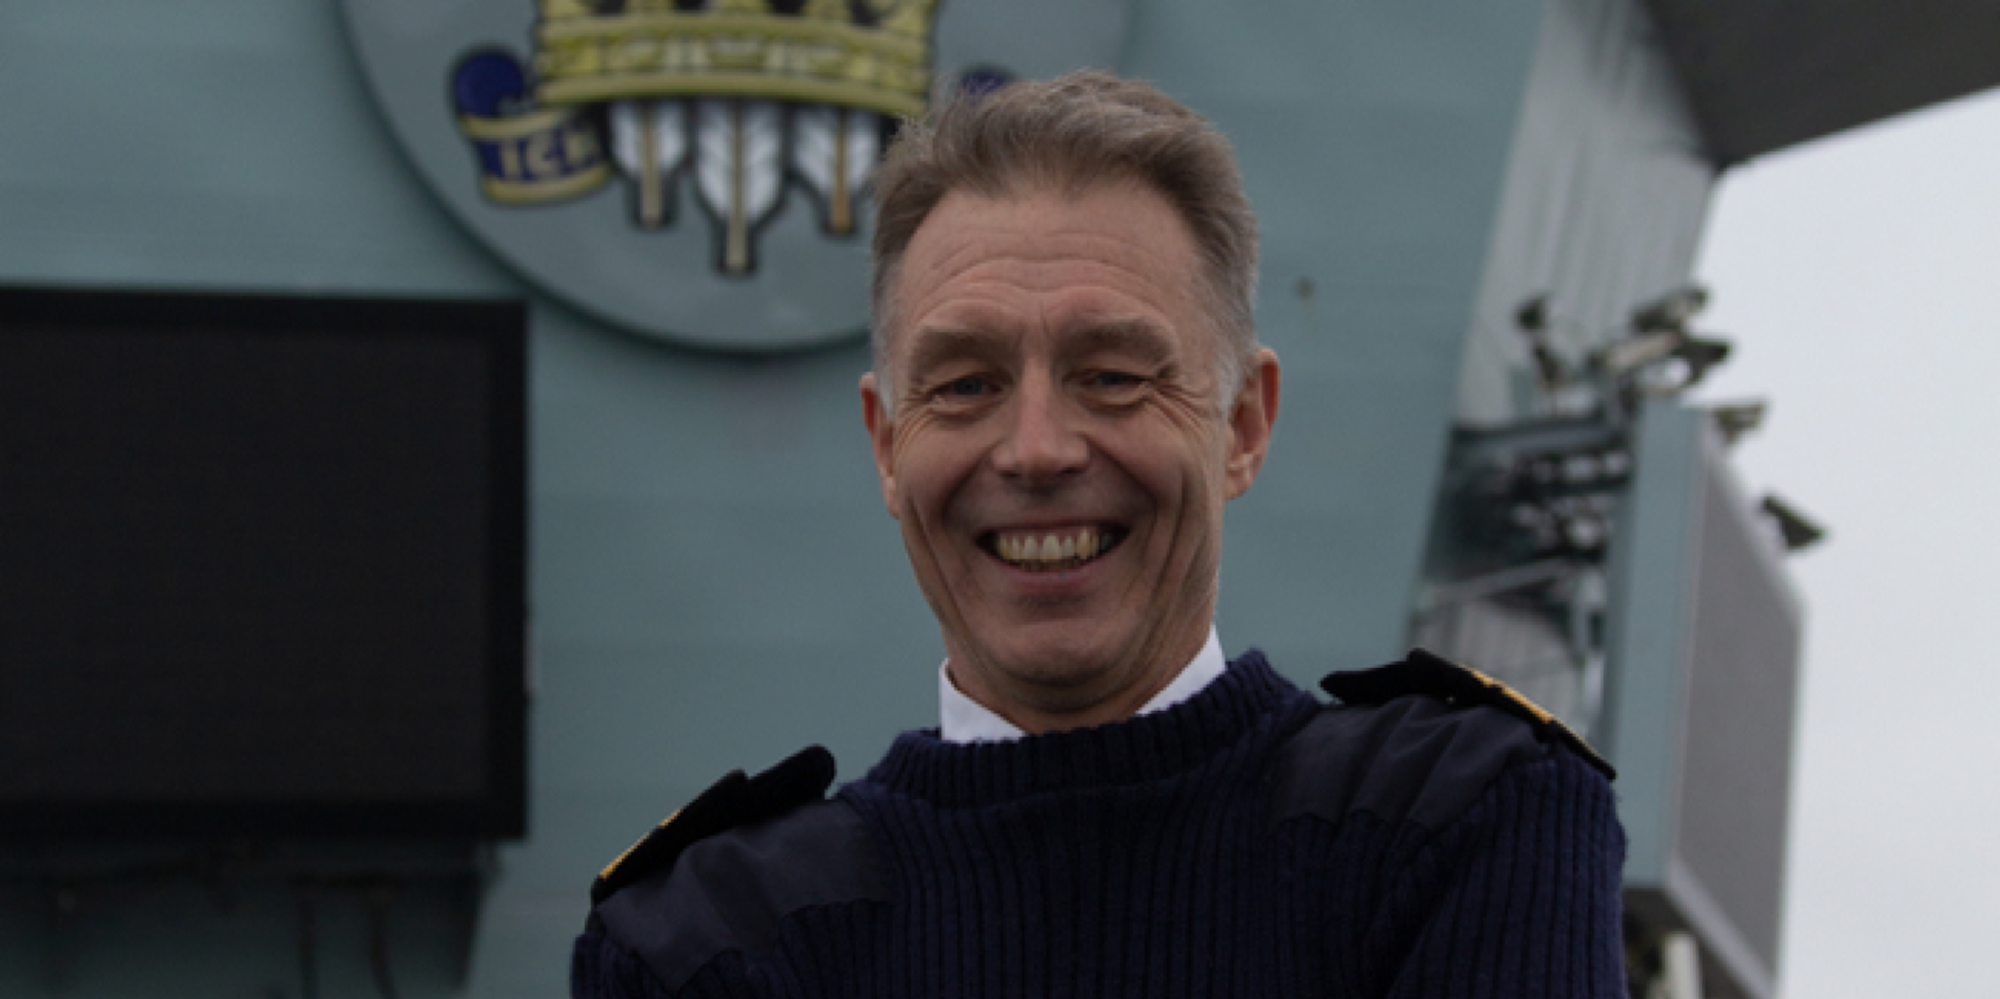 A head shot of a senior Navy Vice Admiral smiling in front of a ship